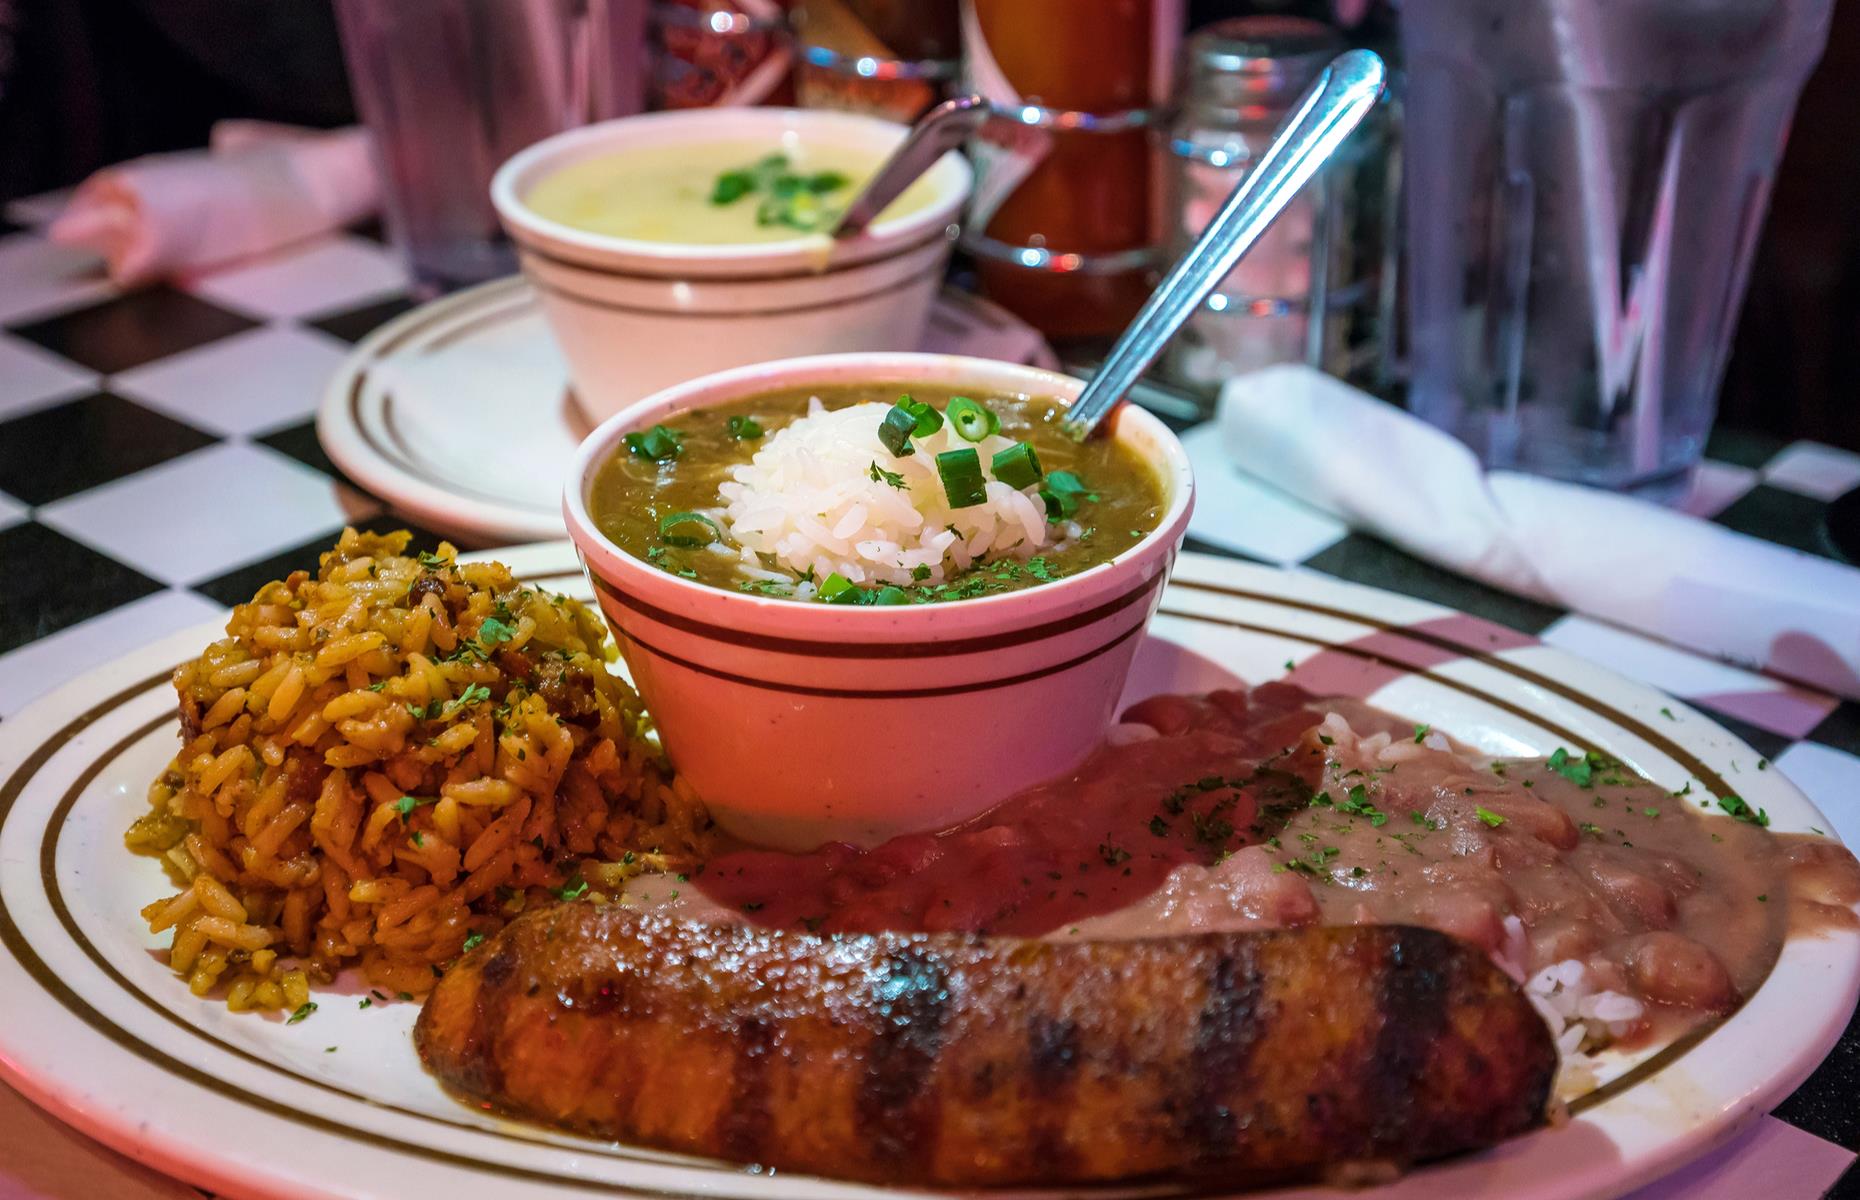 <p><a href="https://noculinarytours.com/">This tour</a> takes you straight to the best Creole and Cajun food in NOLA. You'll pound the streets of the French Quarter for three hours, dipping into local haunts to try traditional dishes like seafood gumbo and beef brisket. You'll get to see a chef demonstration along the way, too.</p>  <p><a href="https://www.loveexploring.com/gallerylist/151612/americas-strangest-festivals-and-events-you-need-to-see-to-believe"><strong>America's strangest events and festivals you need to see to believe</strong></a></p>